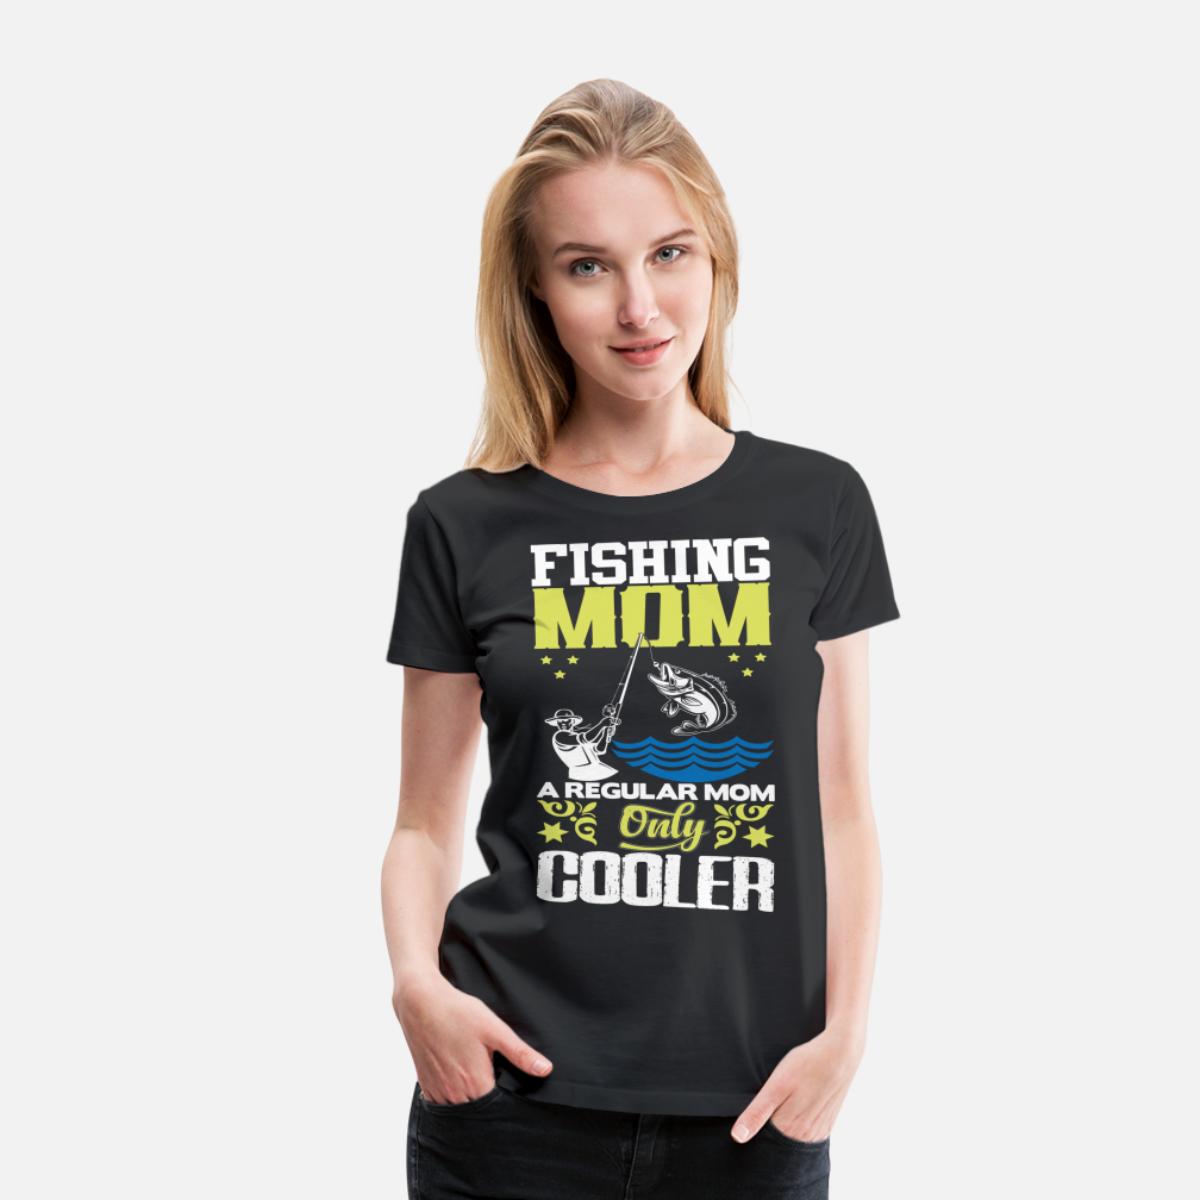 Fishing Mom Shirt Only Cooler